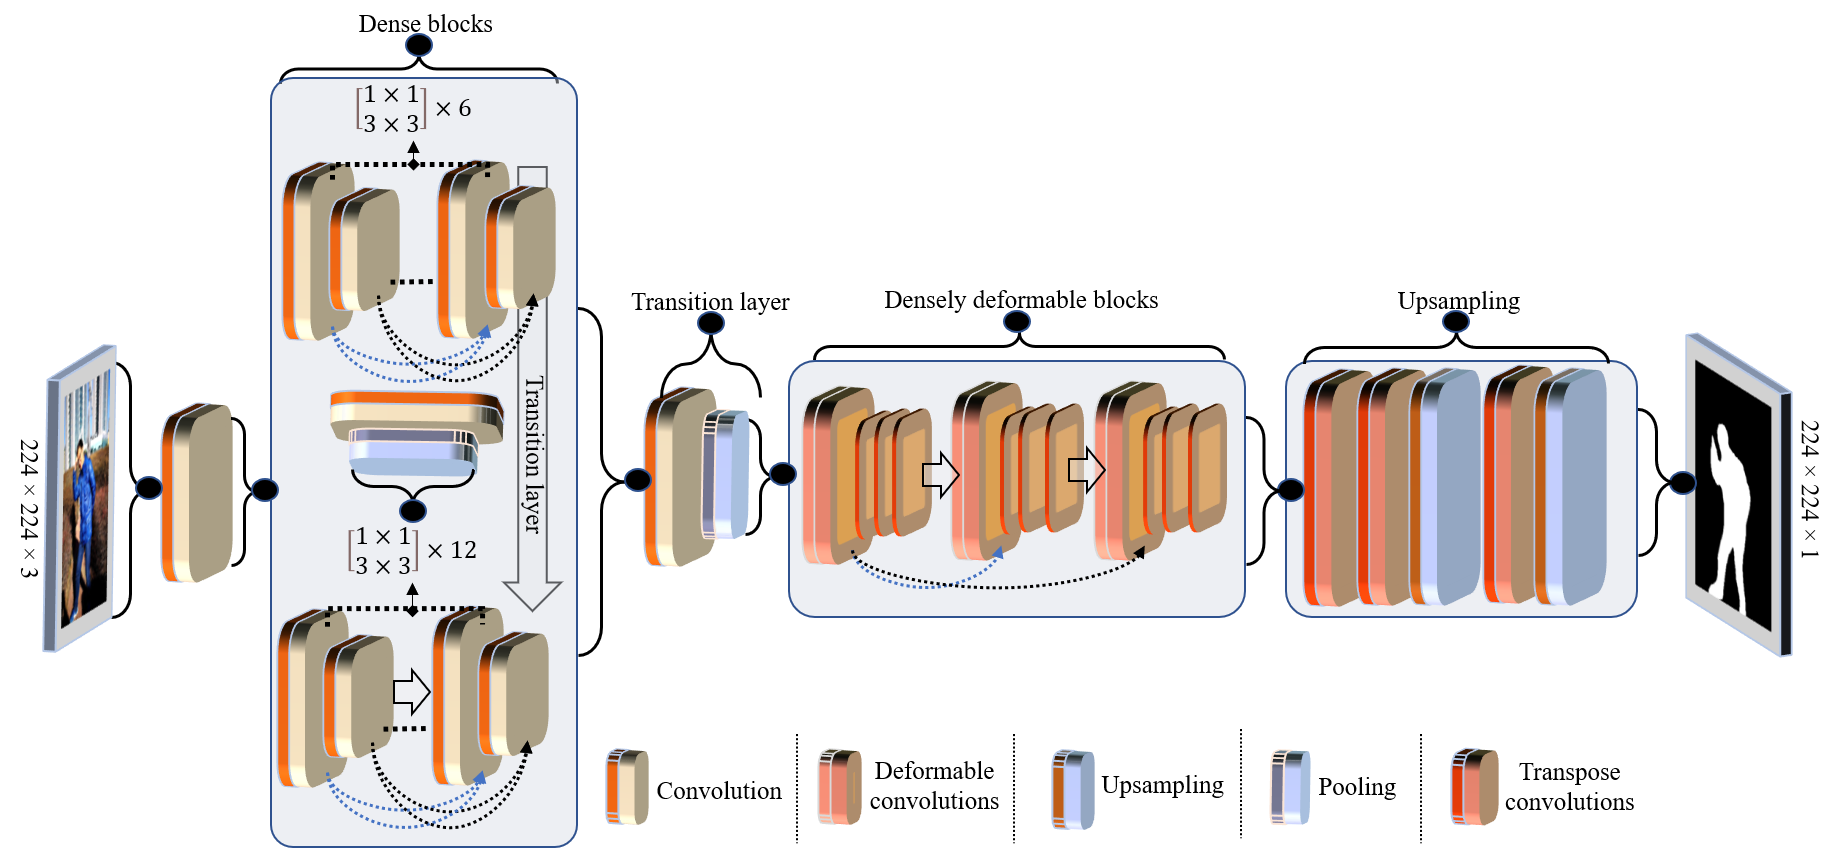 The proposed DDNet schematic diagram